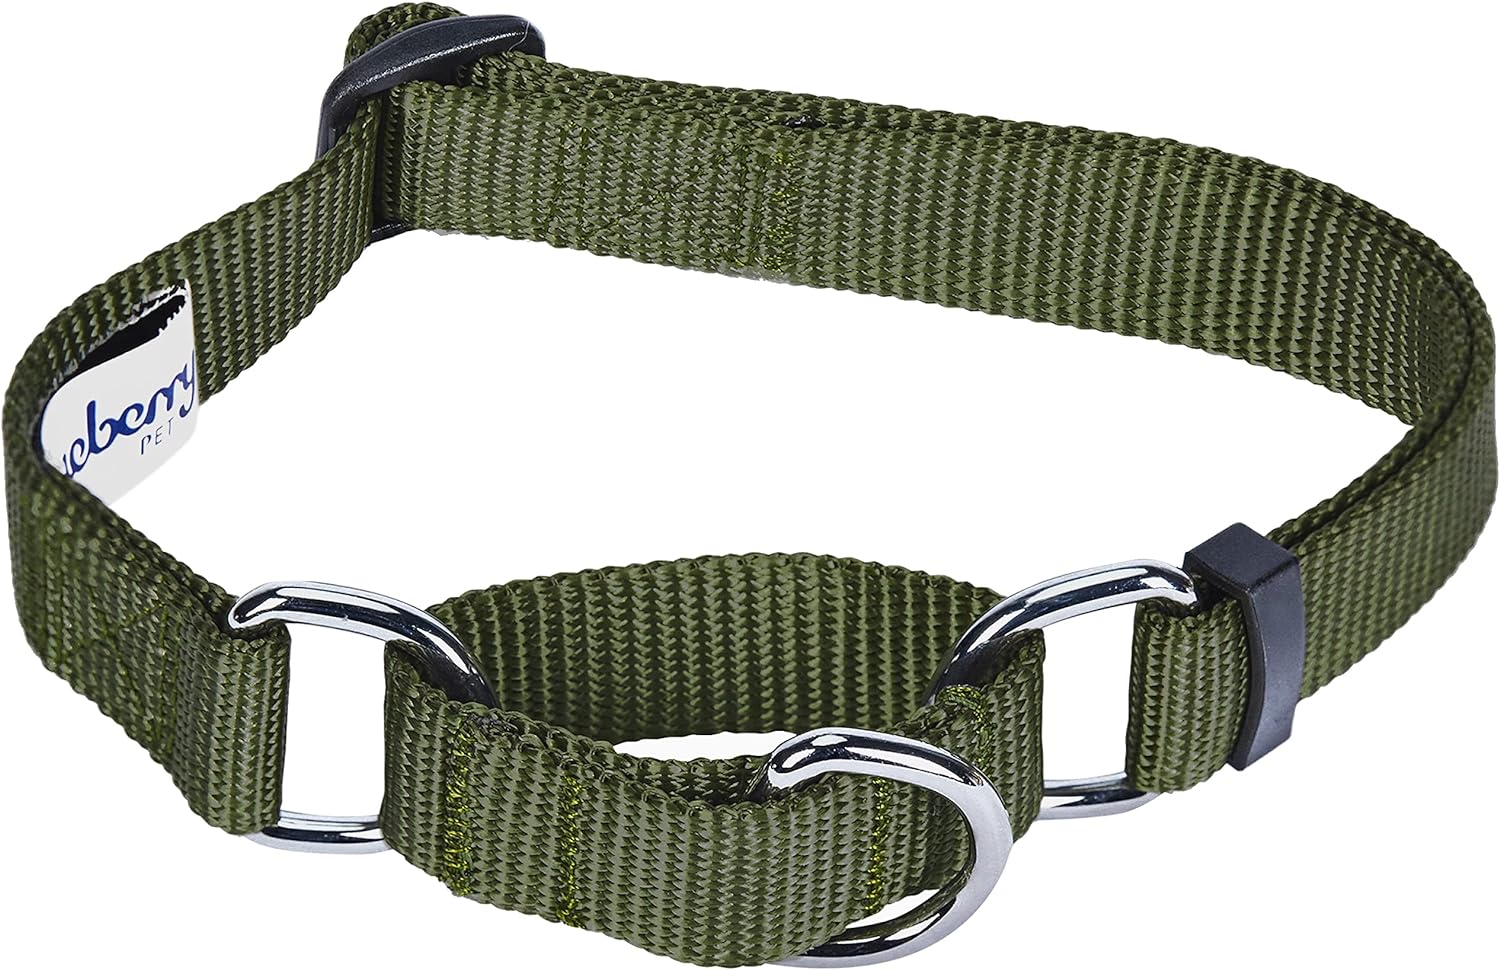 Blueberry Pet Essentials Martingale Safety Training Dog Collar, Military Green, Medium, Heavy Duty Nylon Adjustable Collars for Dogs